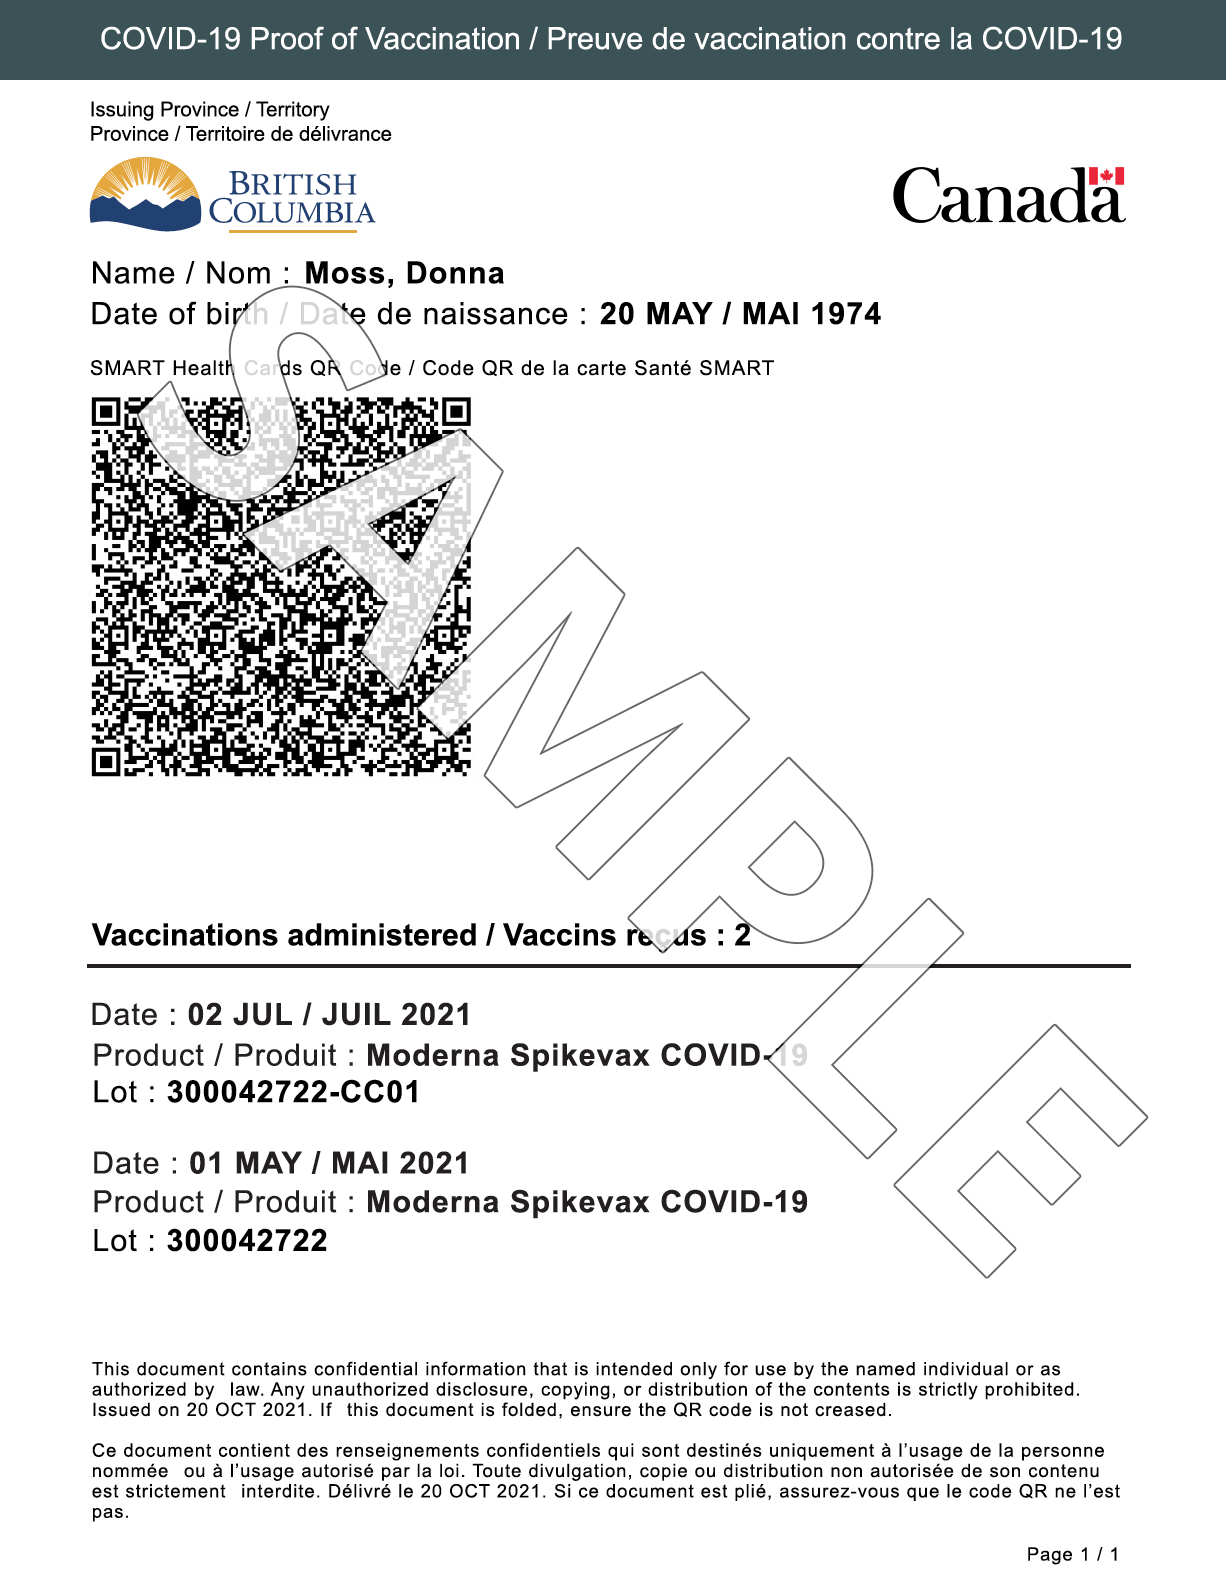 Proof of vaccination – Province of British Columbia